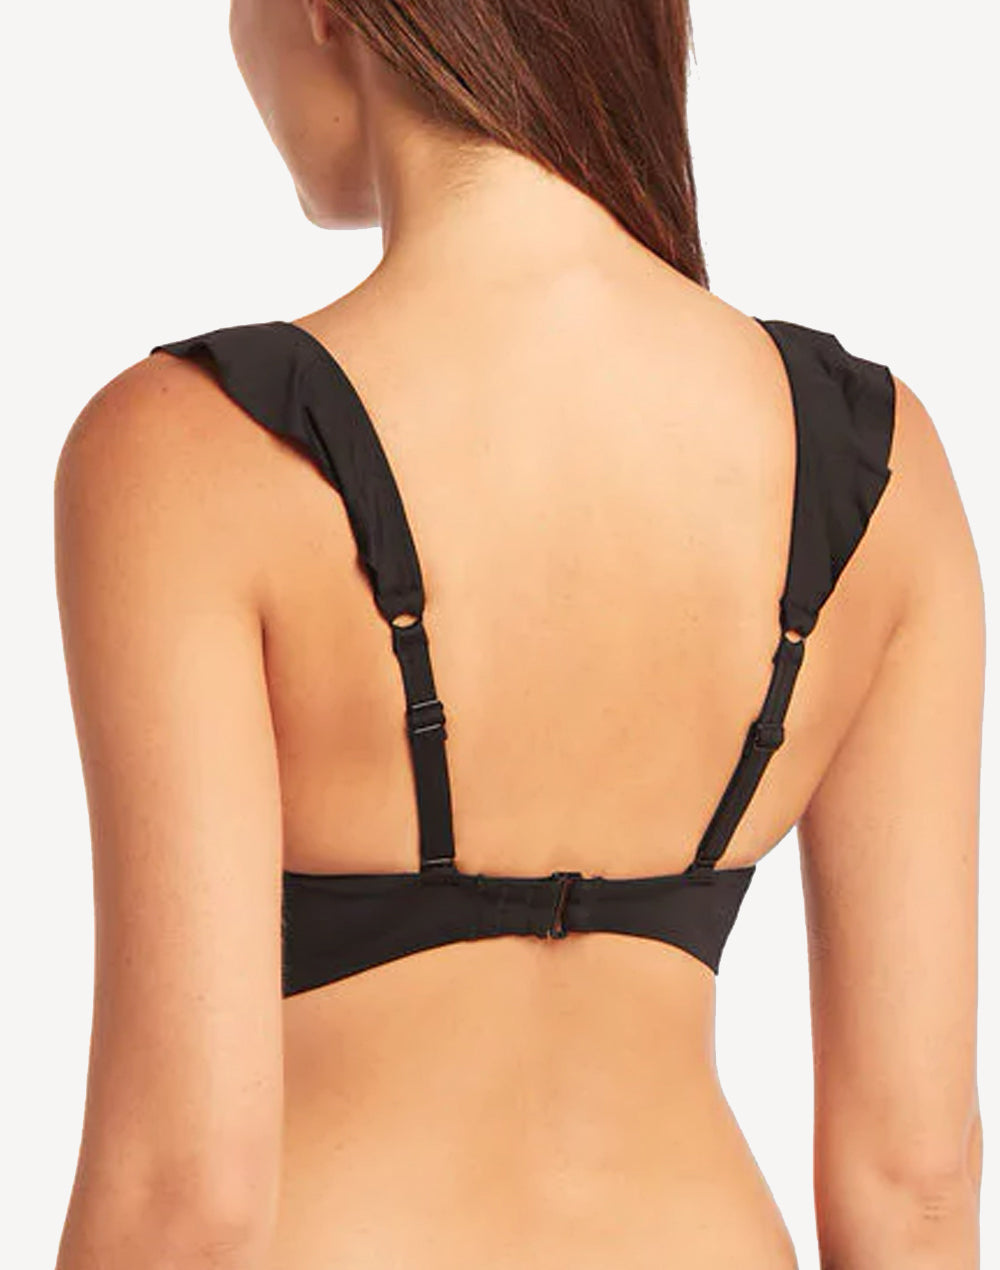 Sea Level Essentials Frill Bra Top - Available Today With Free Shipping!*